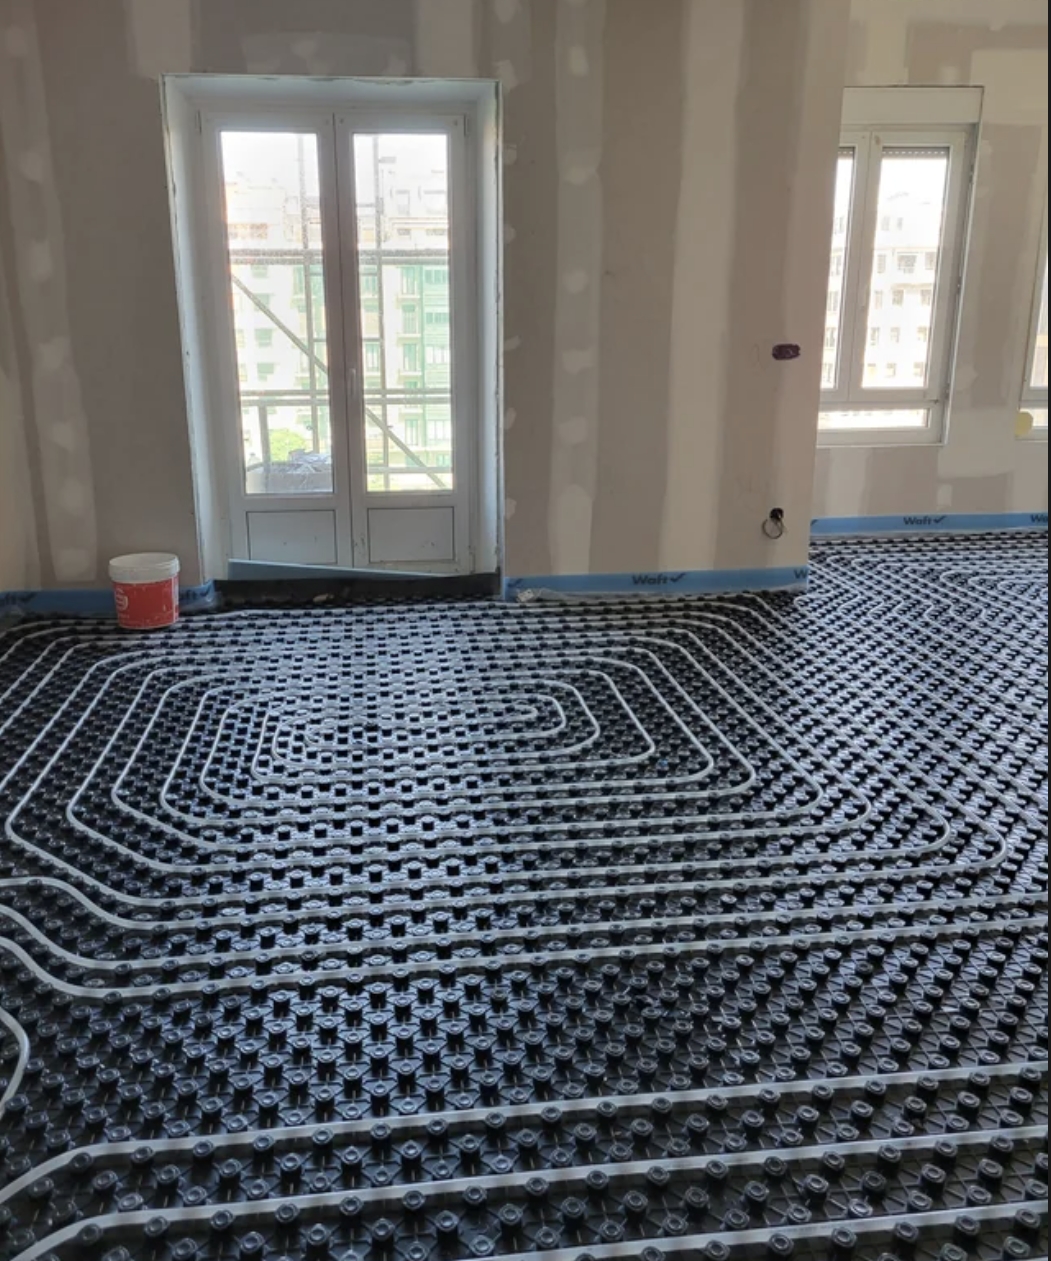 Intricate black floor tubing for underfloor heating installation in an unfurnished room with large windows and bare walls